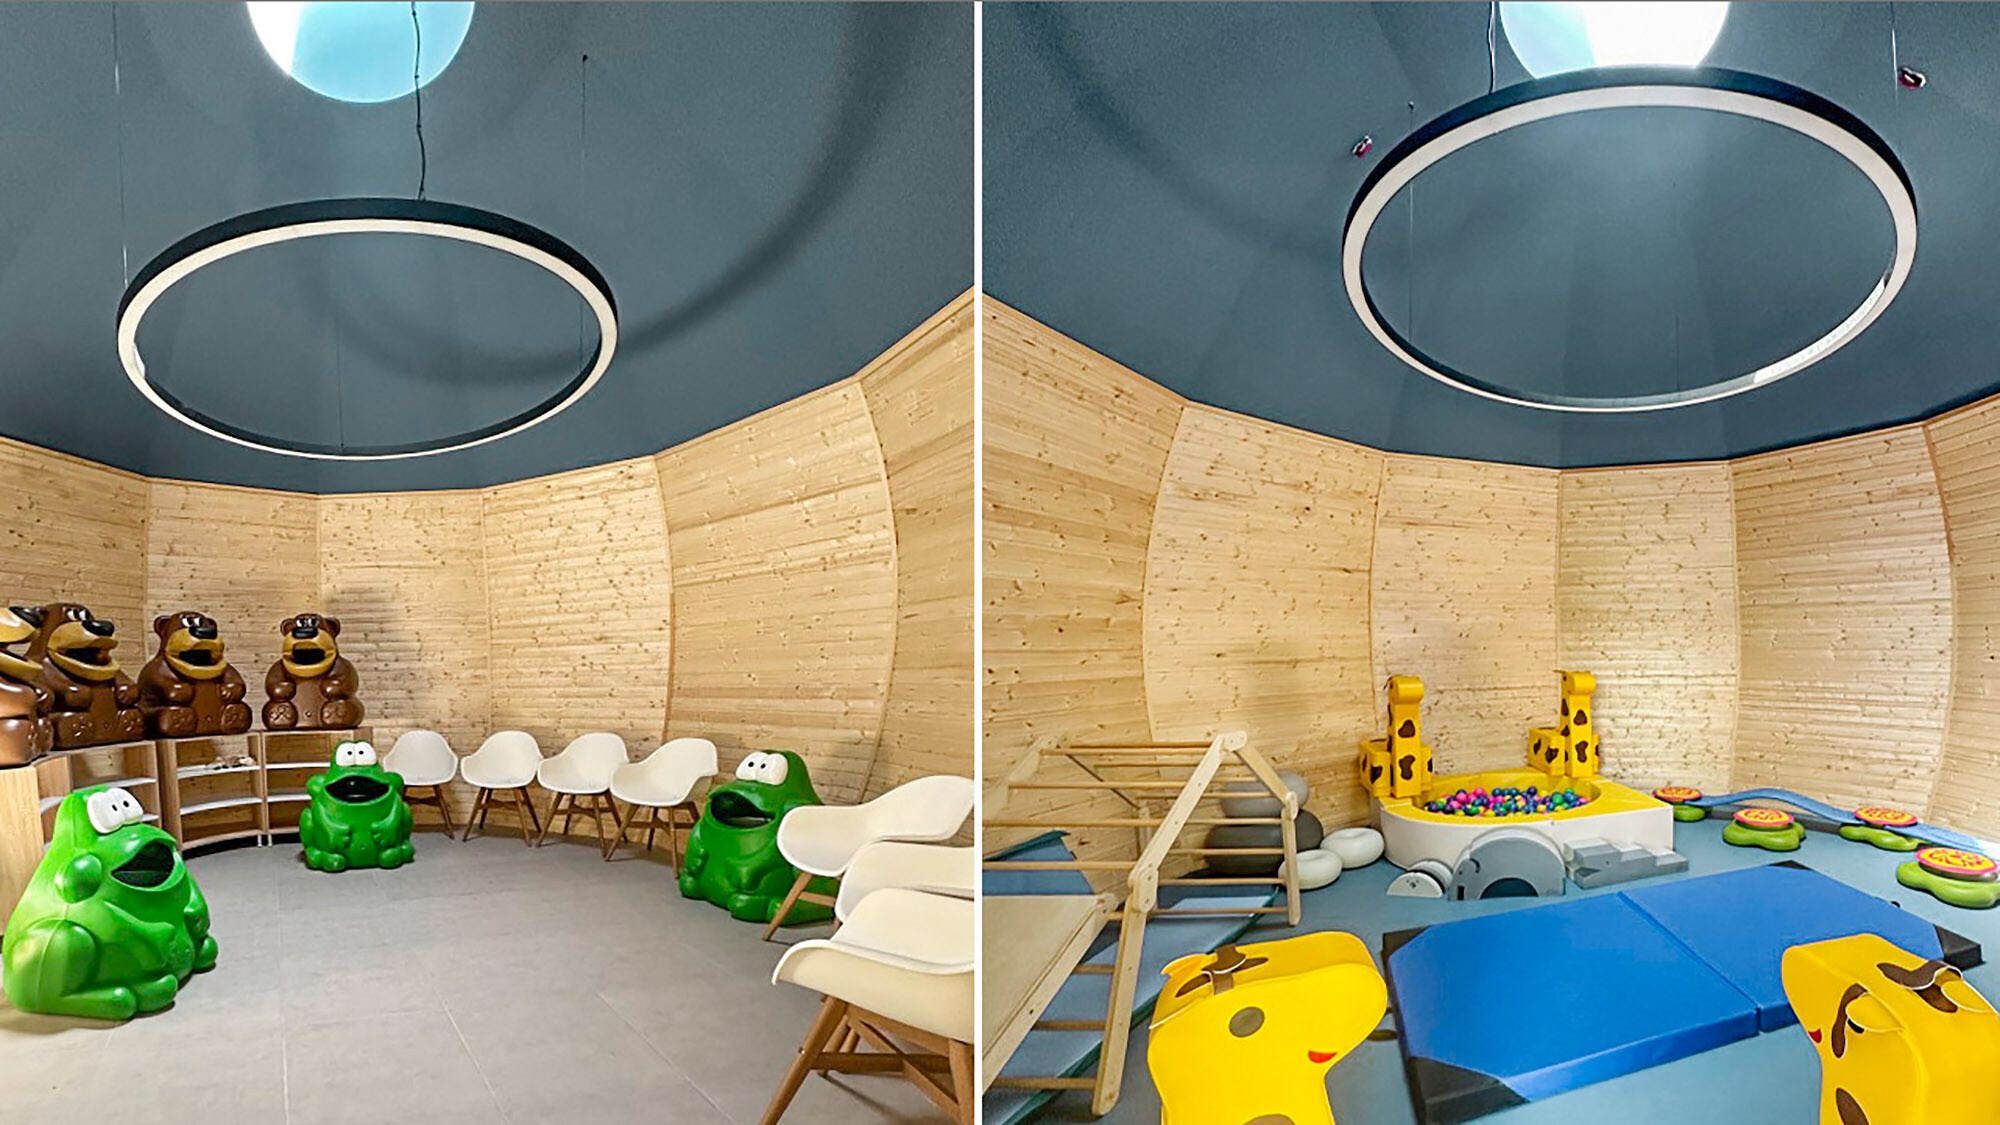 Two interior views in the finished state of the construction: on the left, playful and cheerful furnishings with seats and storage facilities, on the right, gymnastic equipment and toys.